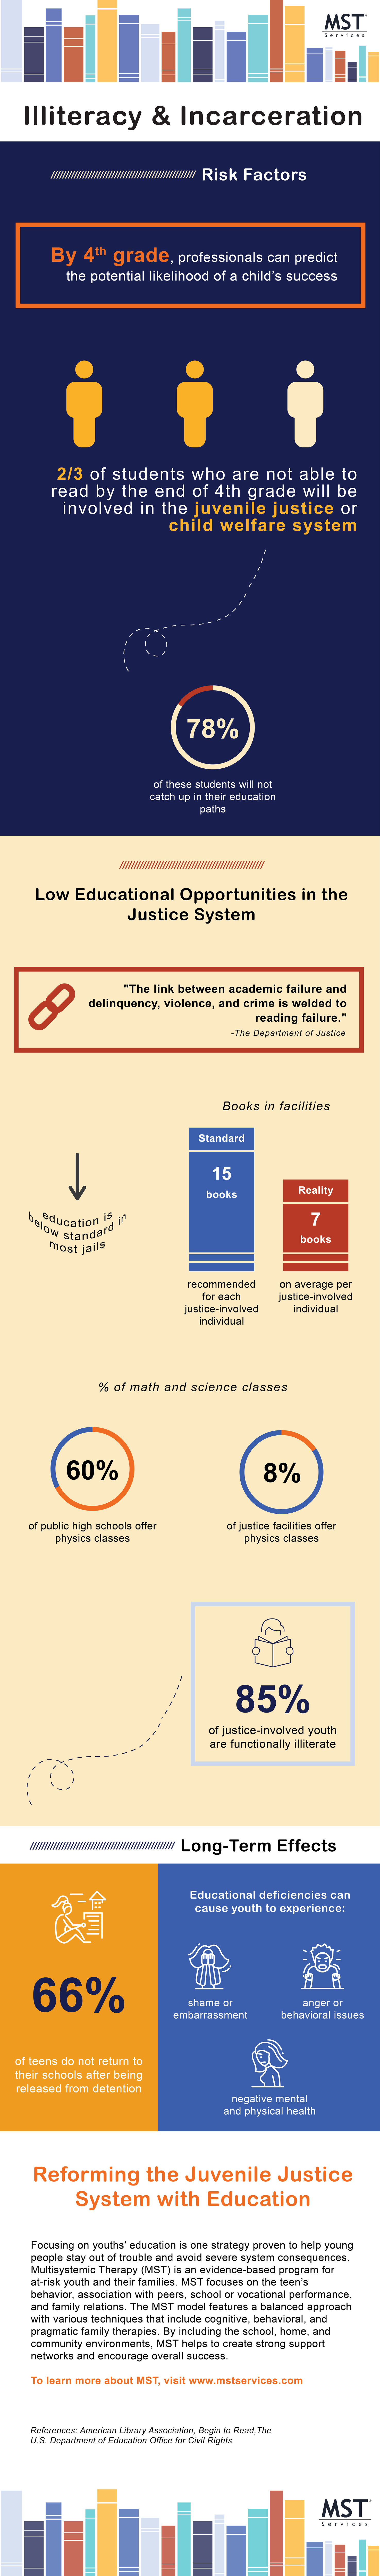 Illiteracy and Incarceration Infographic